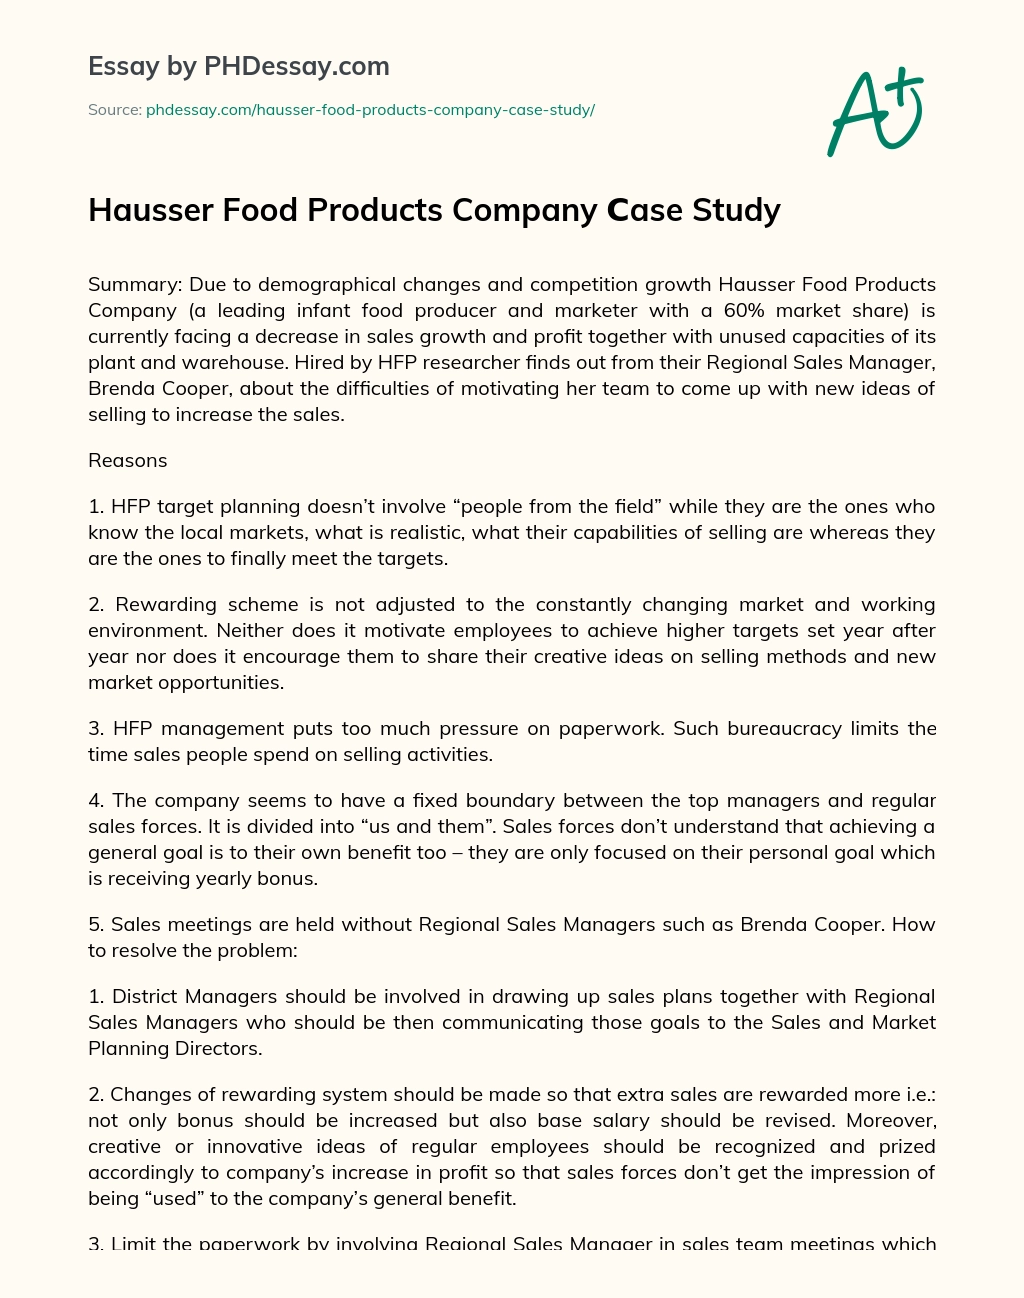 Hausser Food Products Company Case Study essay